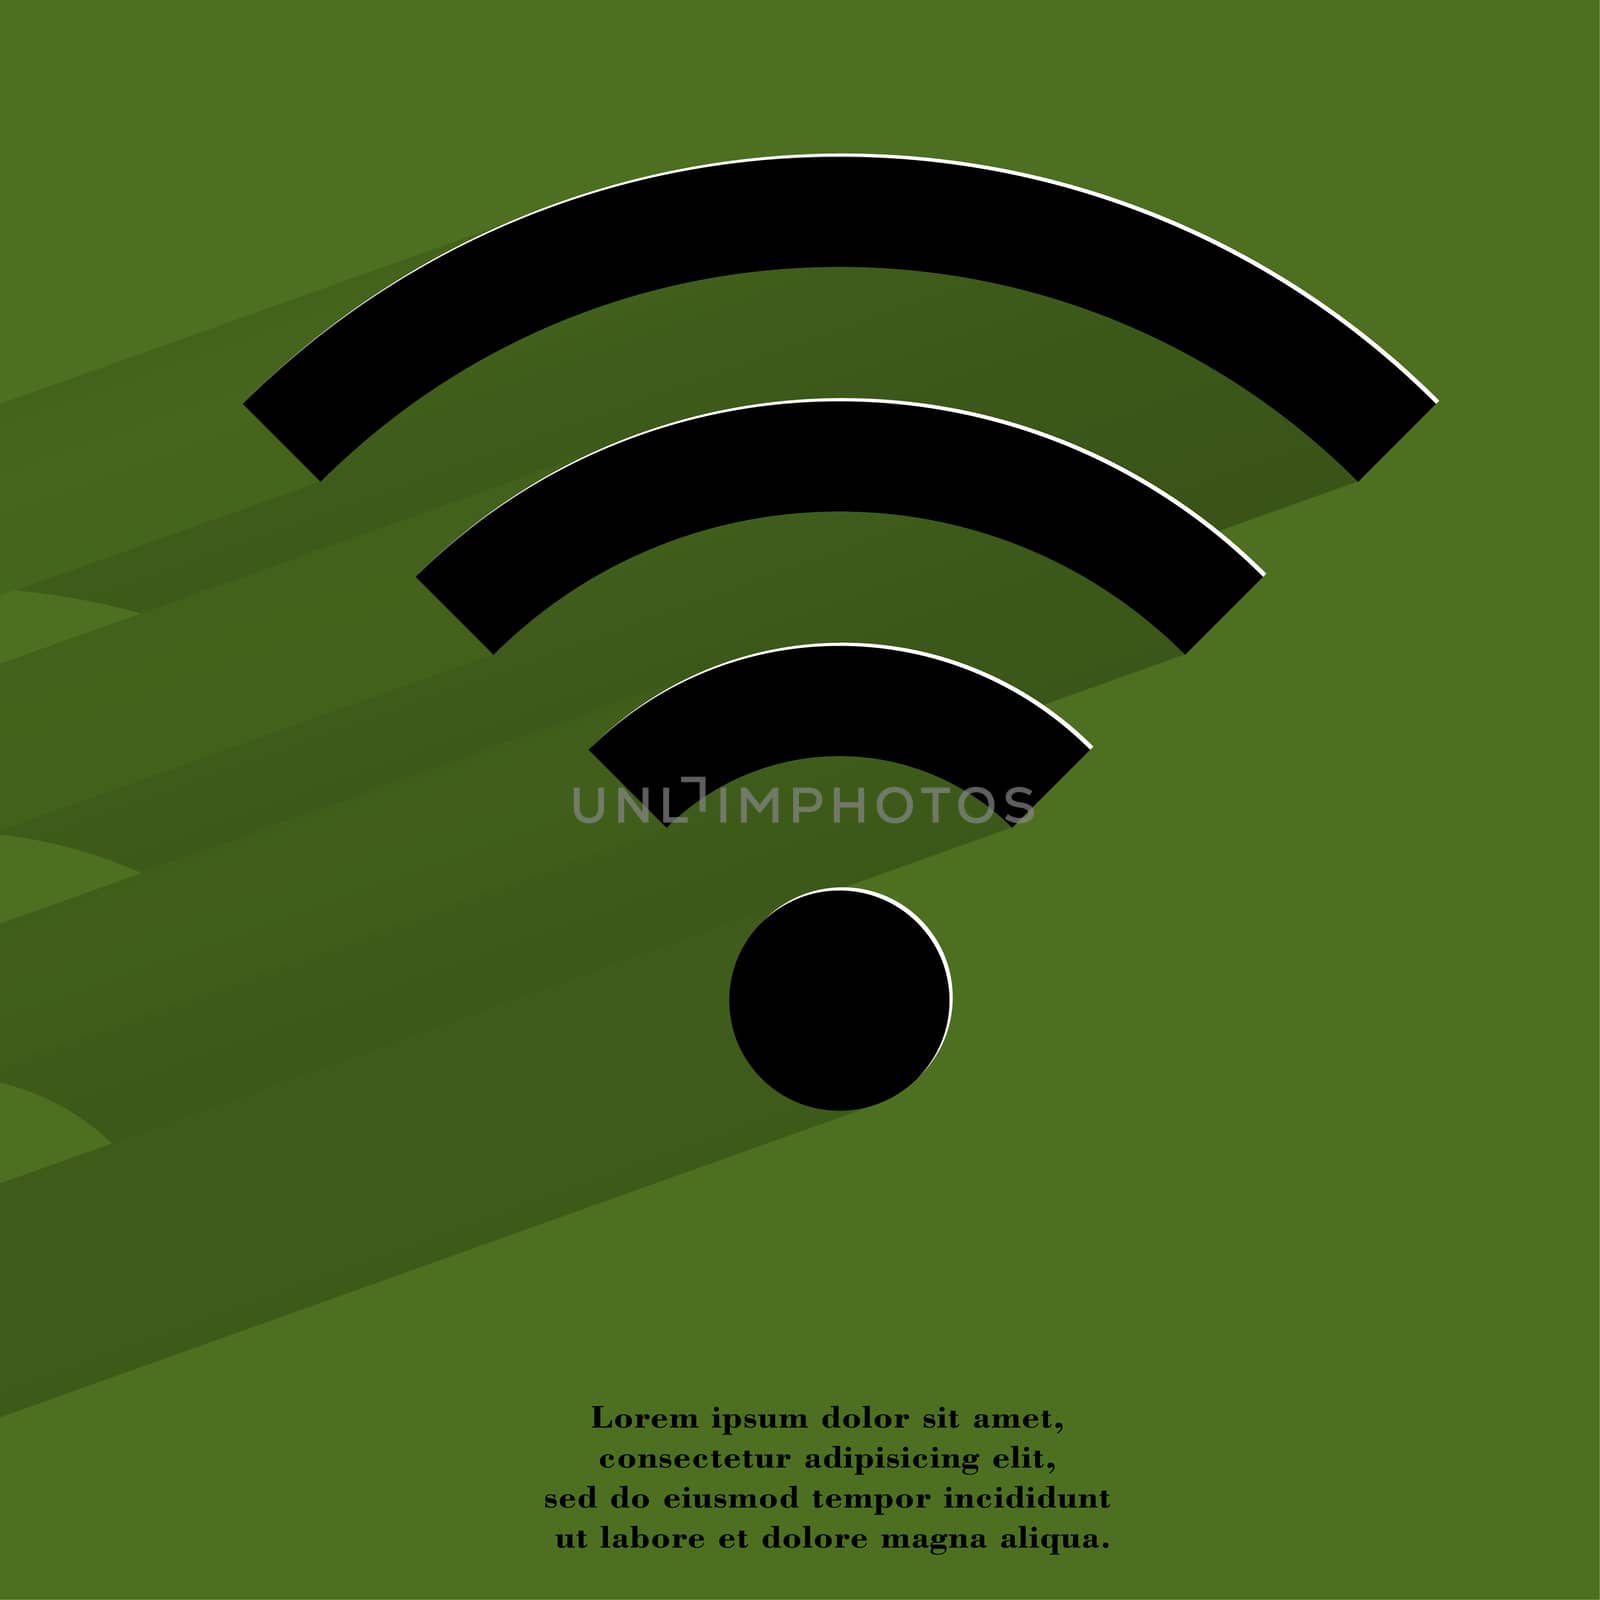 WI-FI. Flat modern web button with long shadow and space for your text. . 